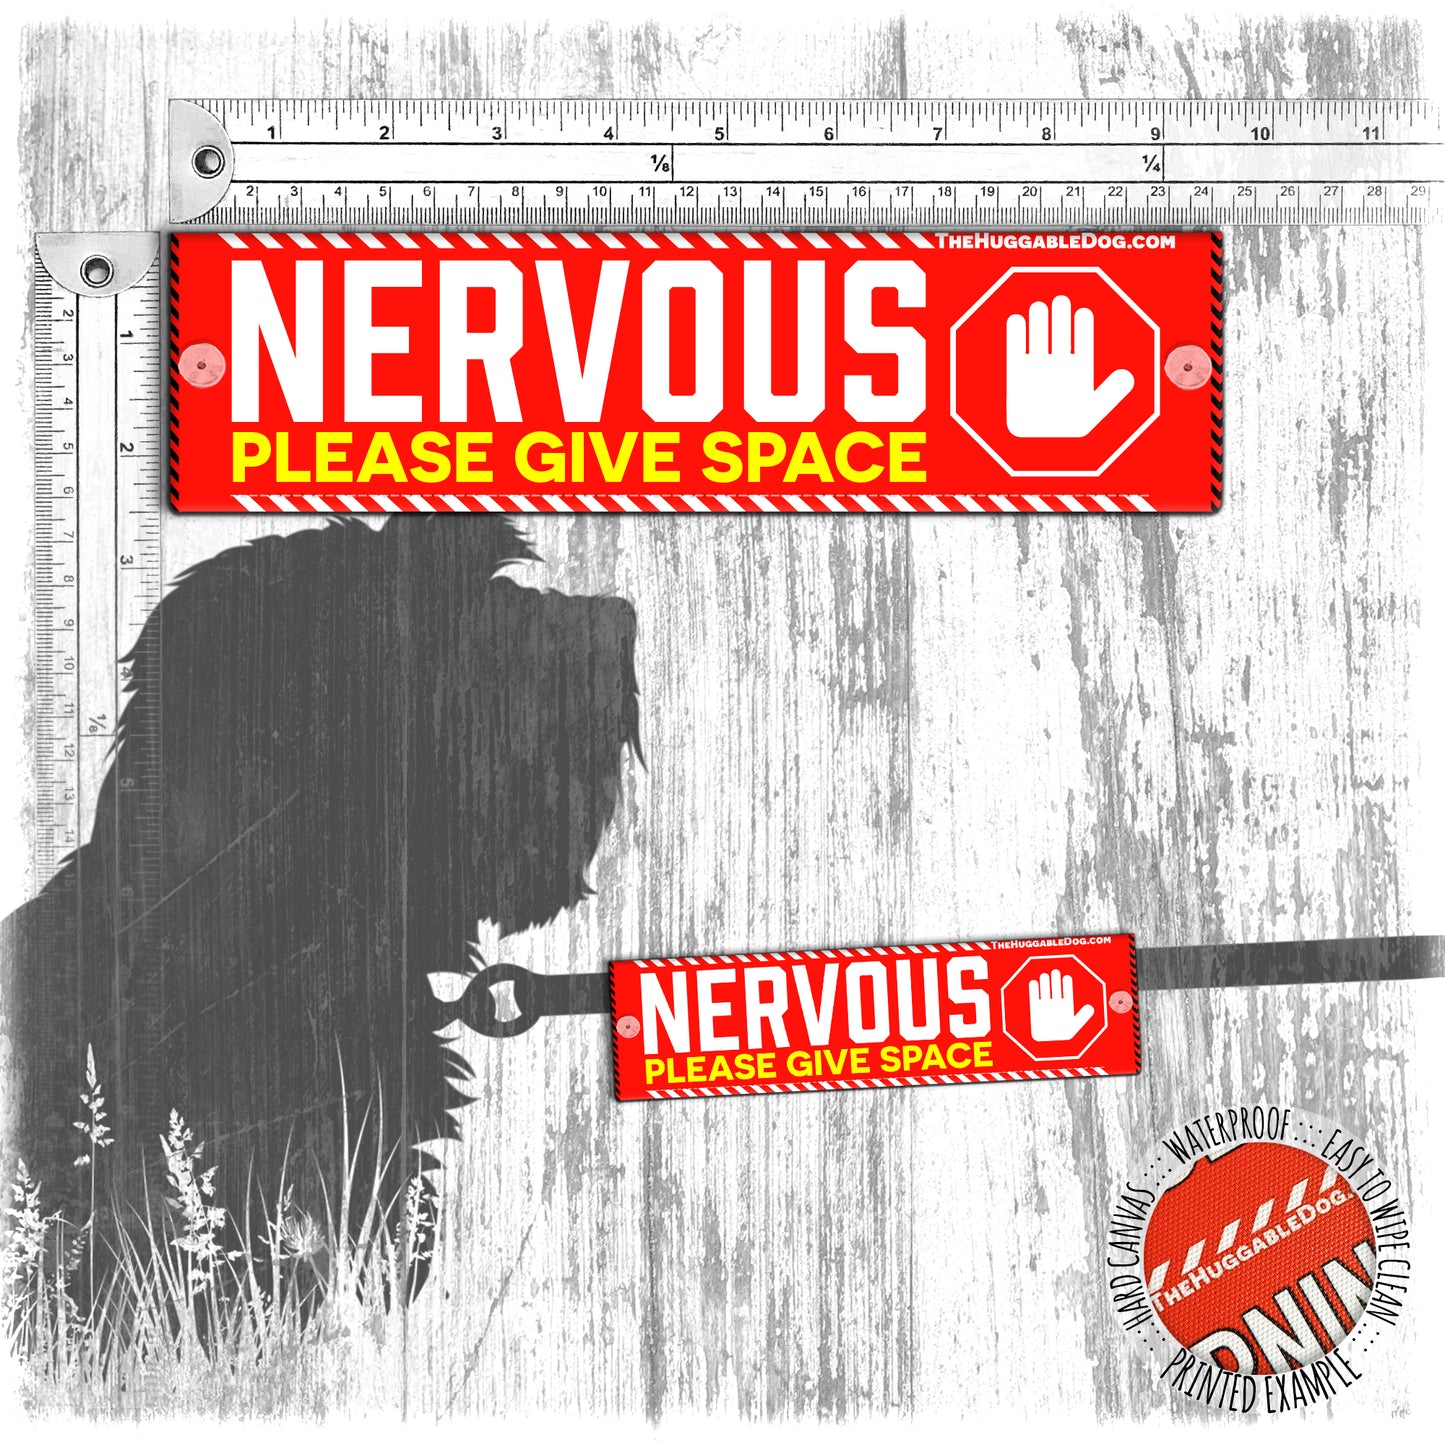 "NERVOUS, please give space". Warning covers for dogs leashes.